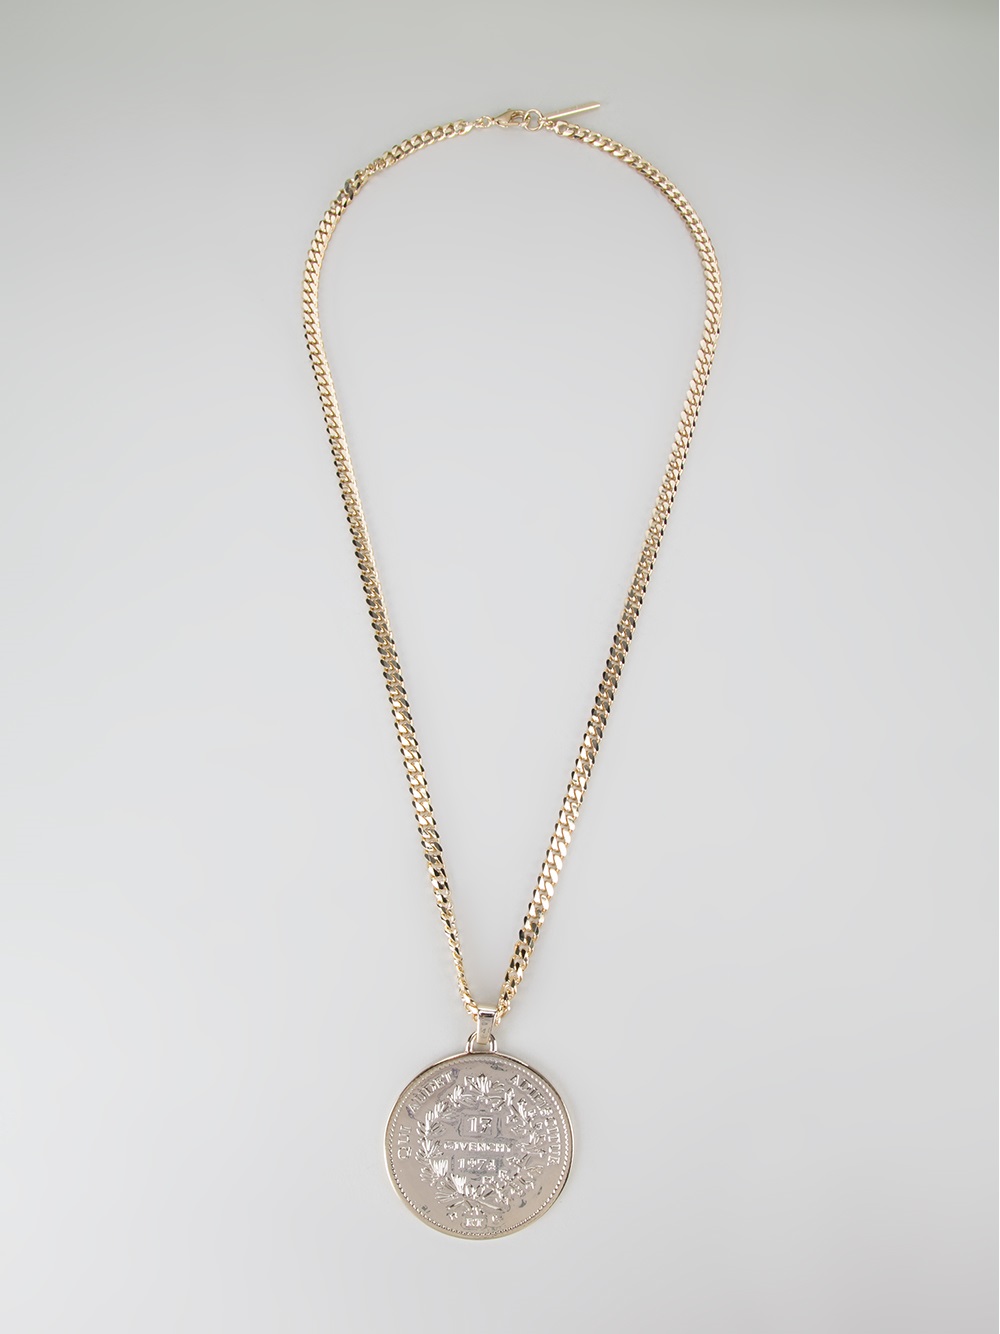 Lyst - Givenchy Pendant Necklace in Metallic